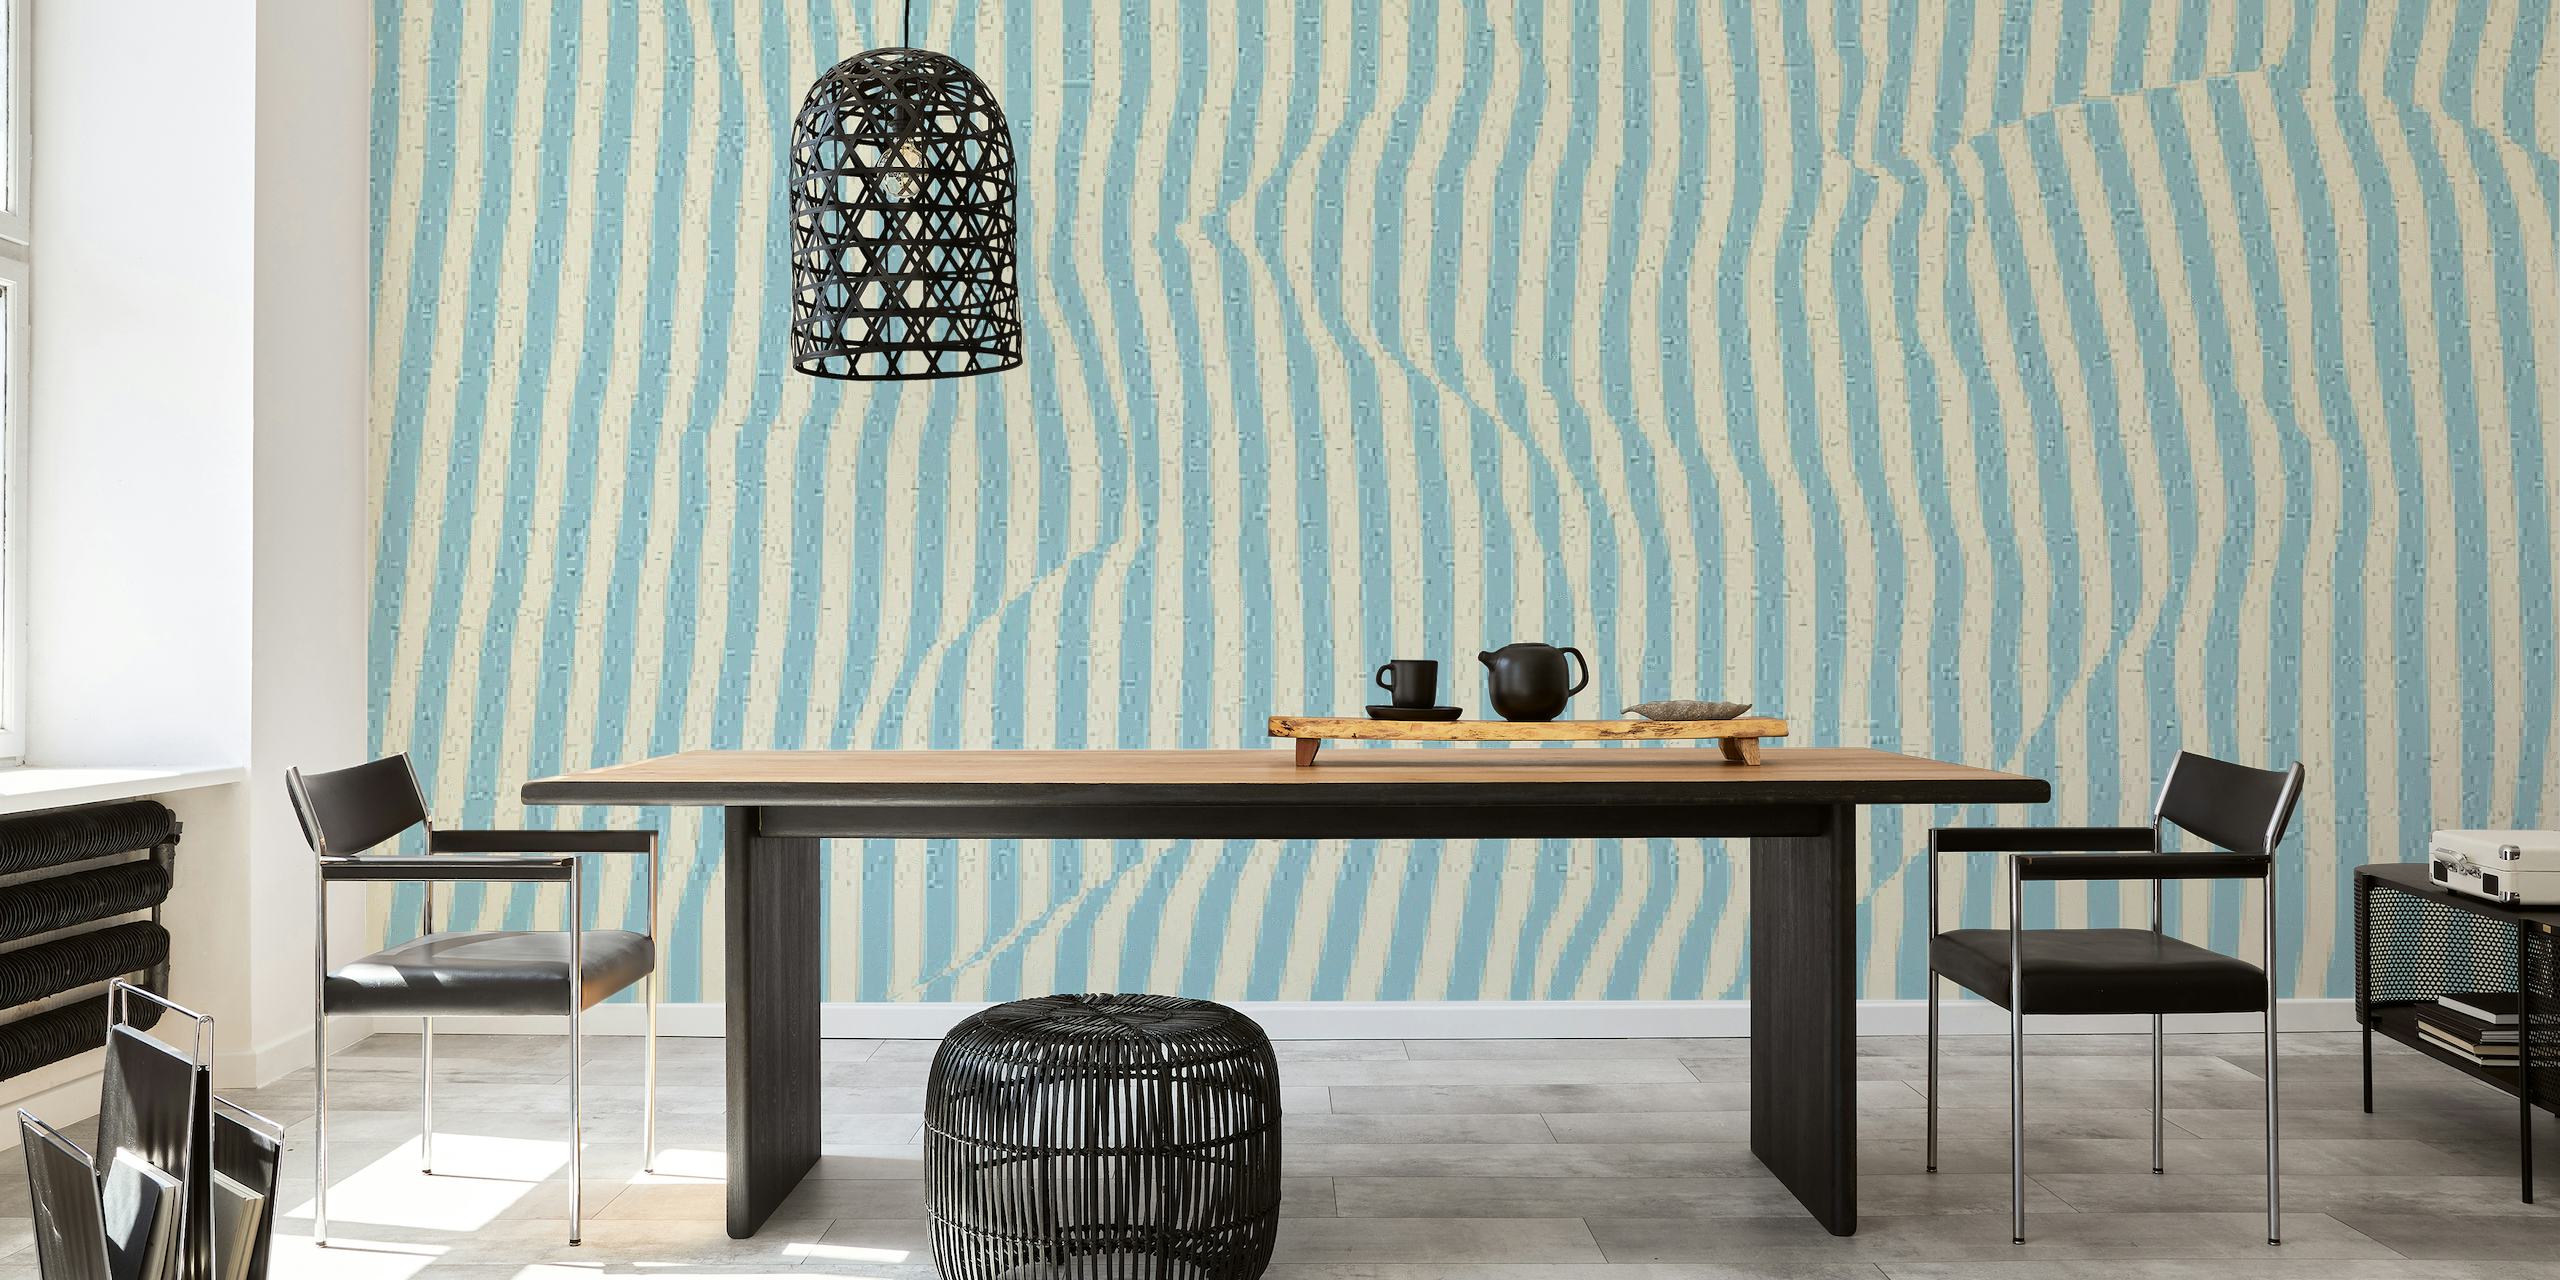 Abstract blue stripes wall mural giving a calming effect